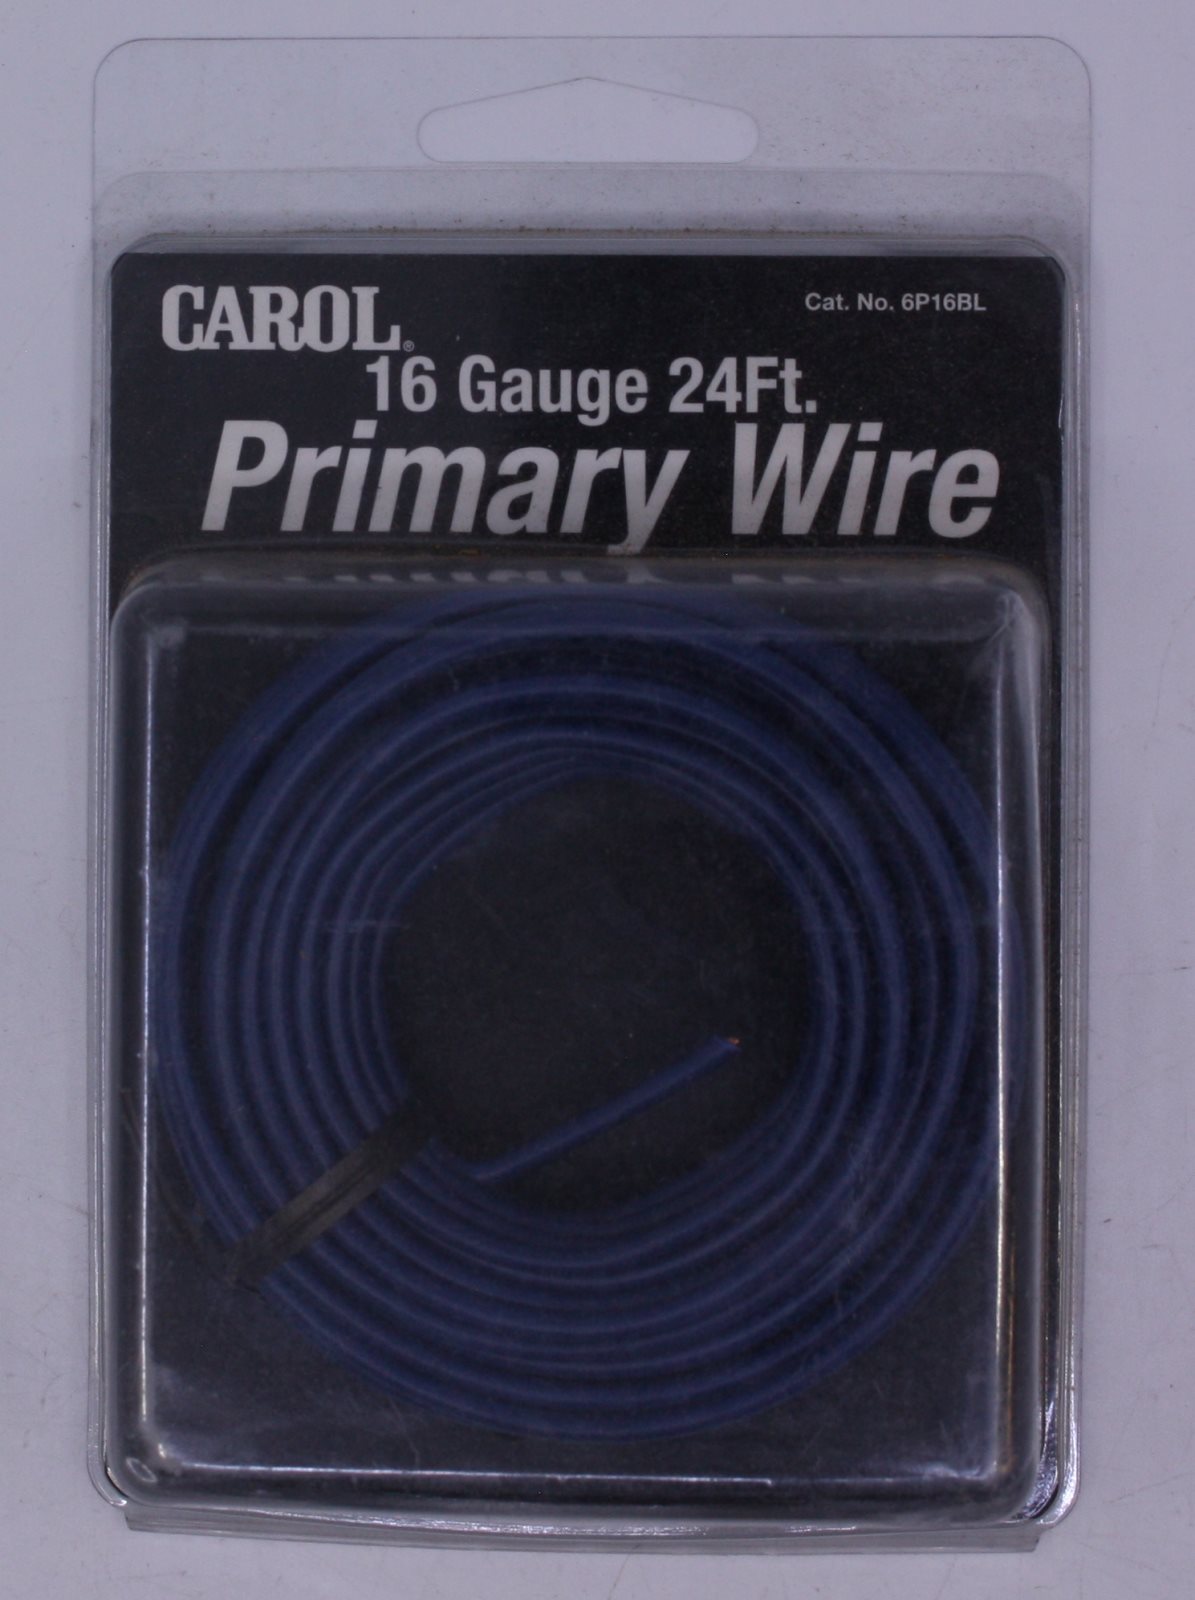 Carol 6P16BL 24' Primary Wire by General Cable